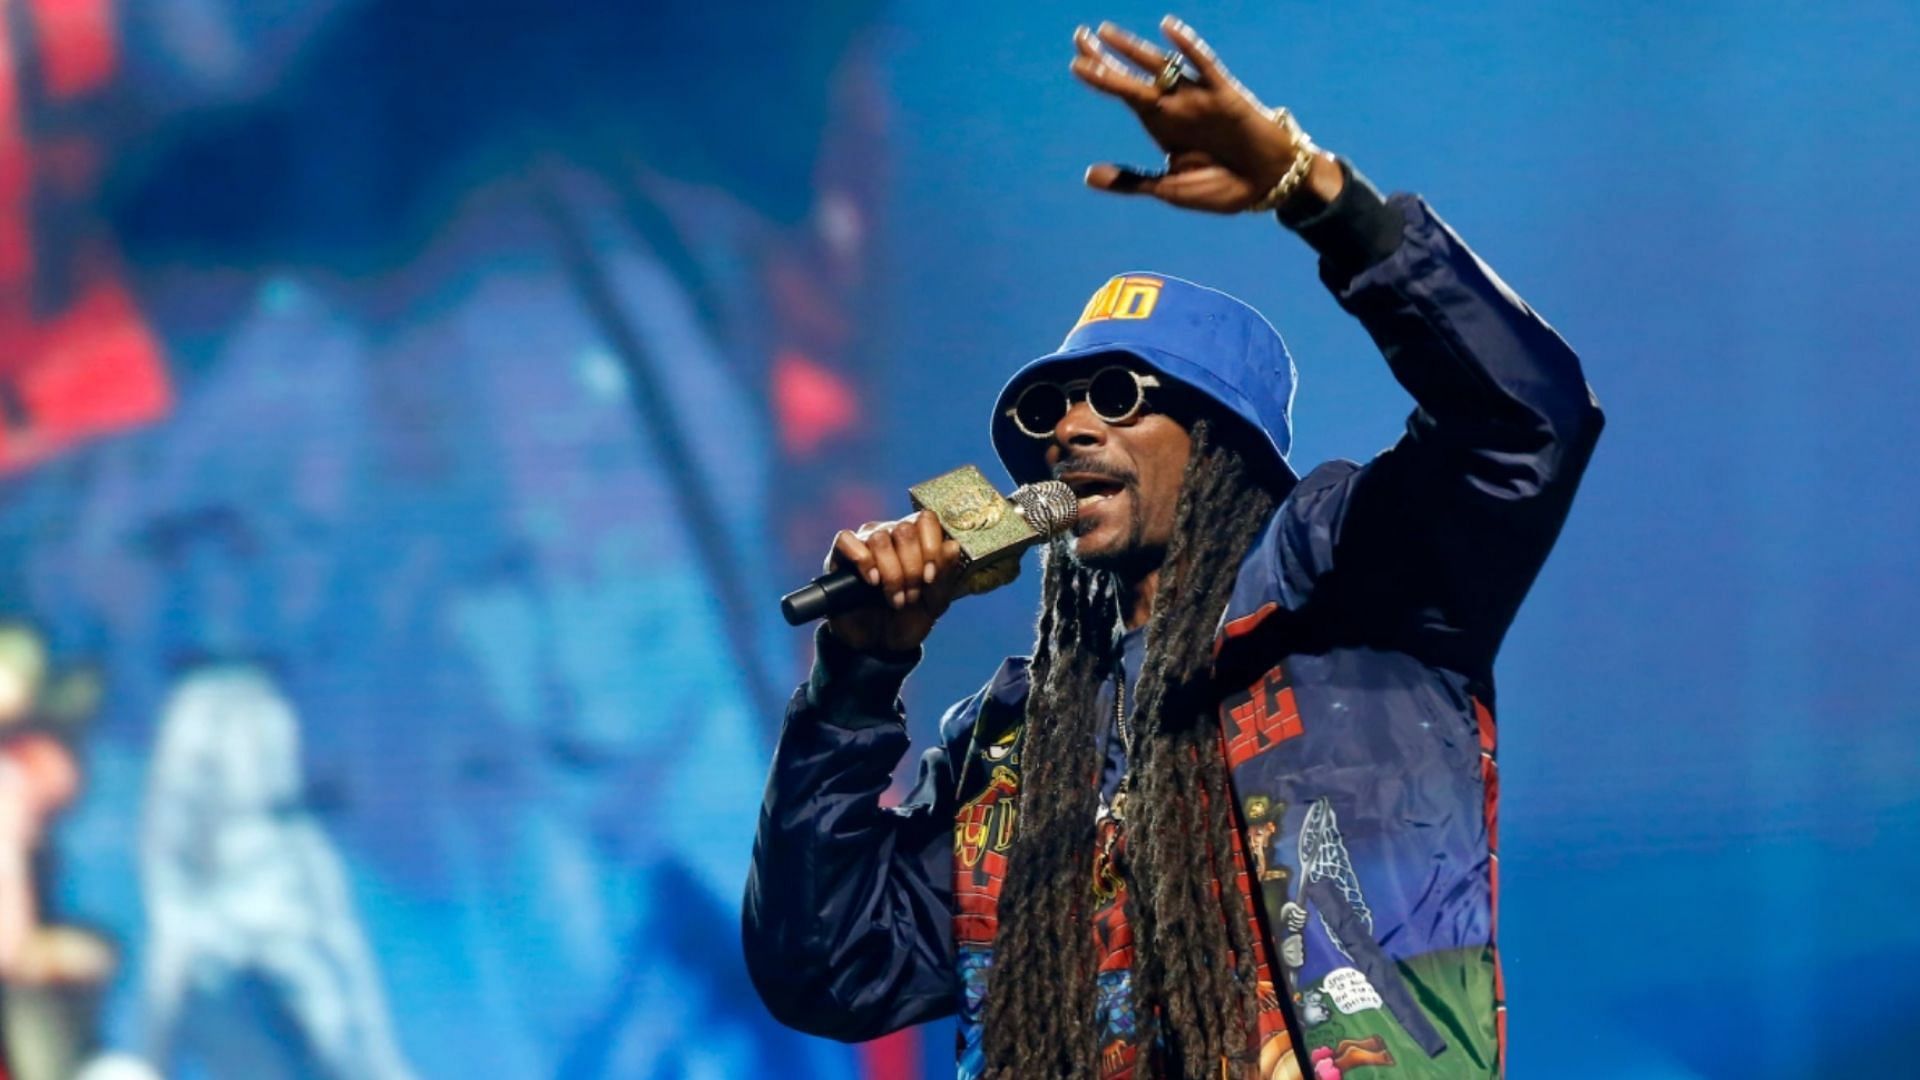 Snoop Dogg will perform at the Spokane Arena next year. (Image via Getty)